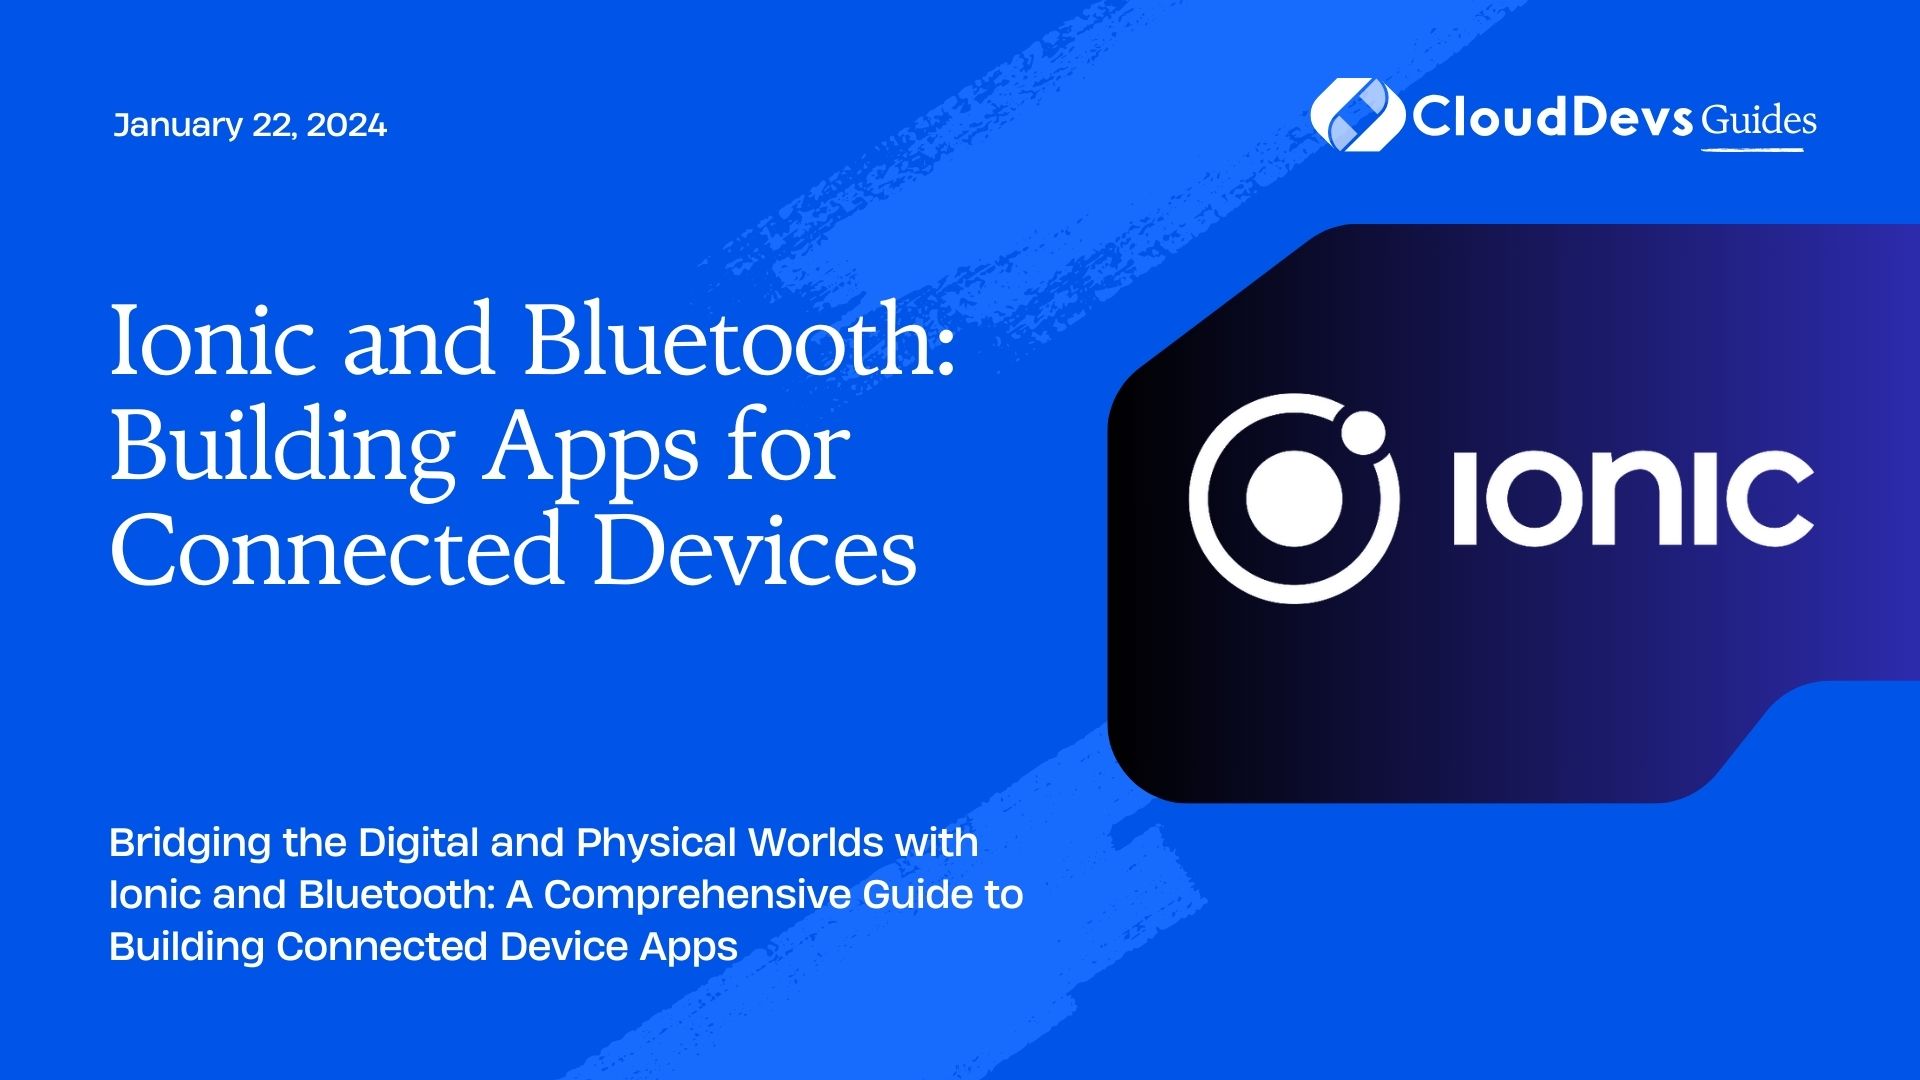 Ionic and Bluetooth: Building Apps for Connected Devices